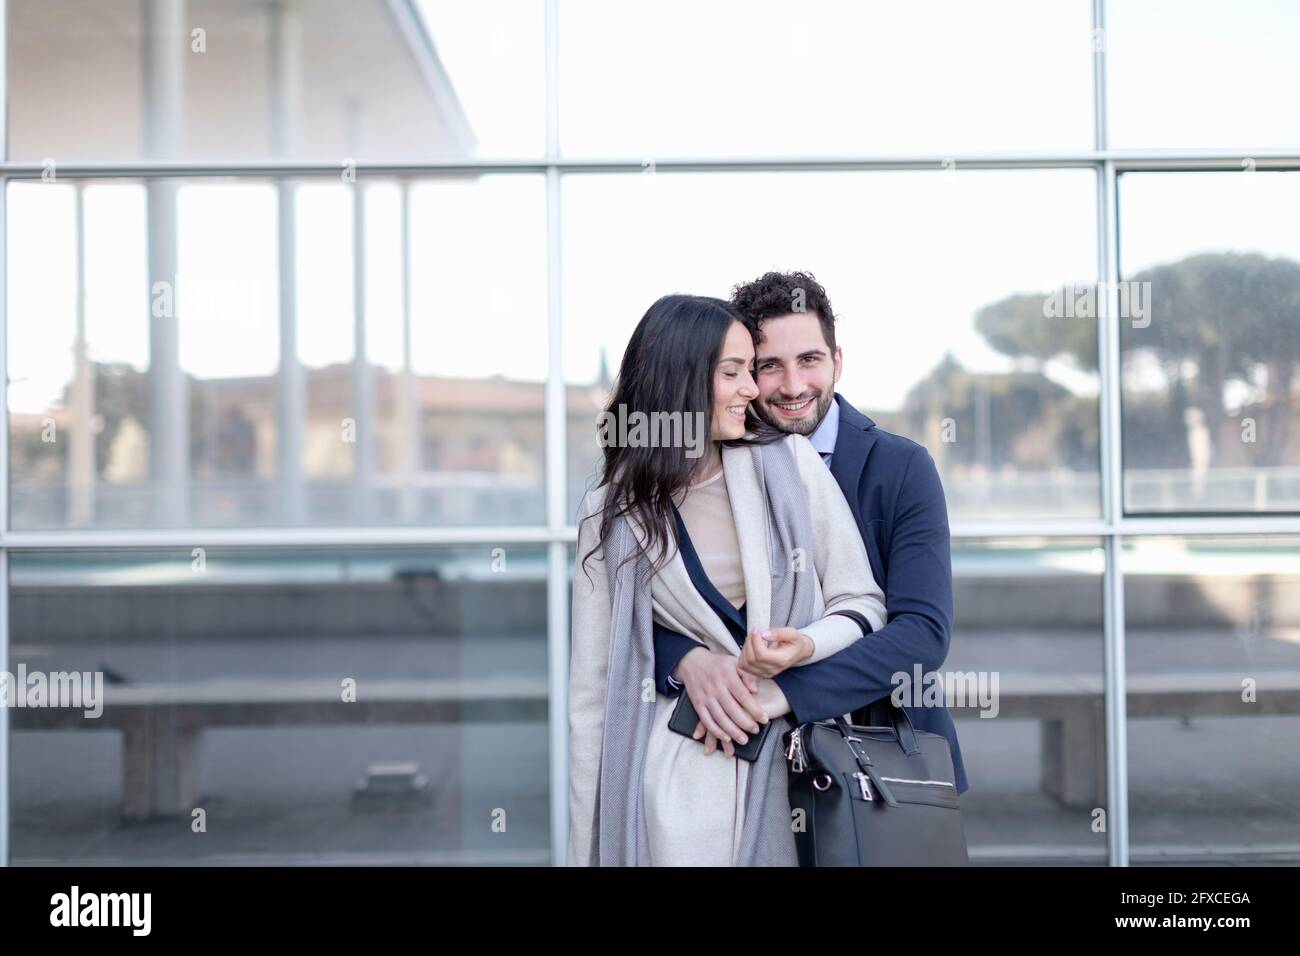 Smiling business couple standing together in front of building Stock Photo